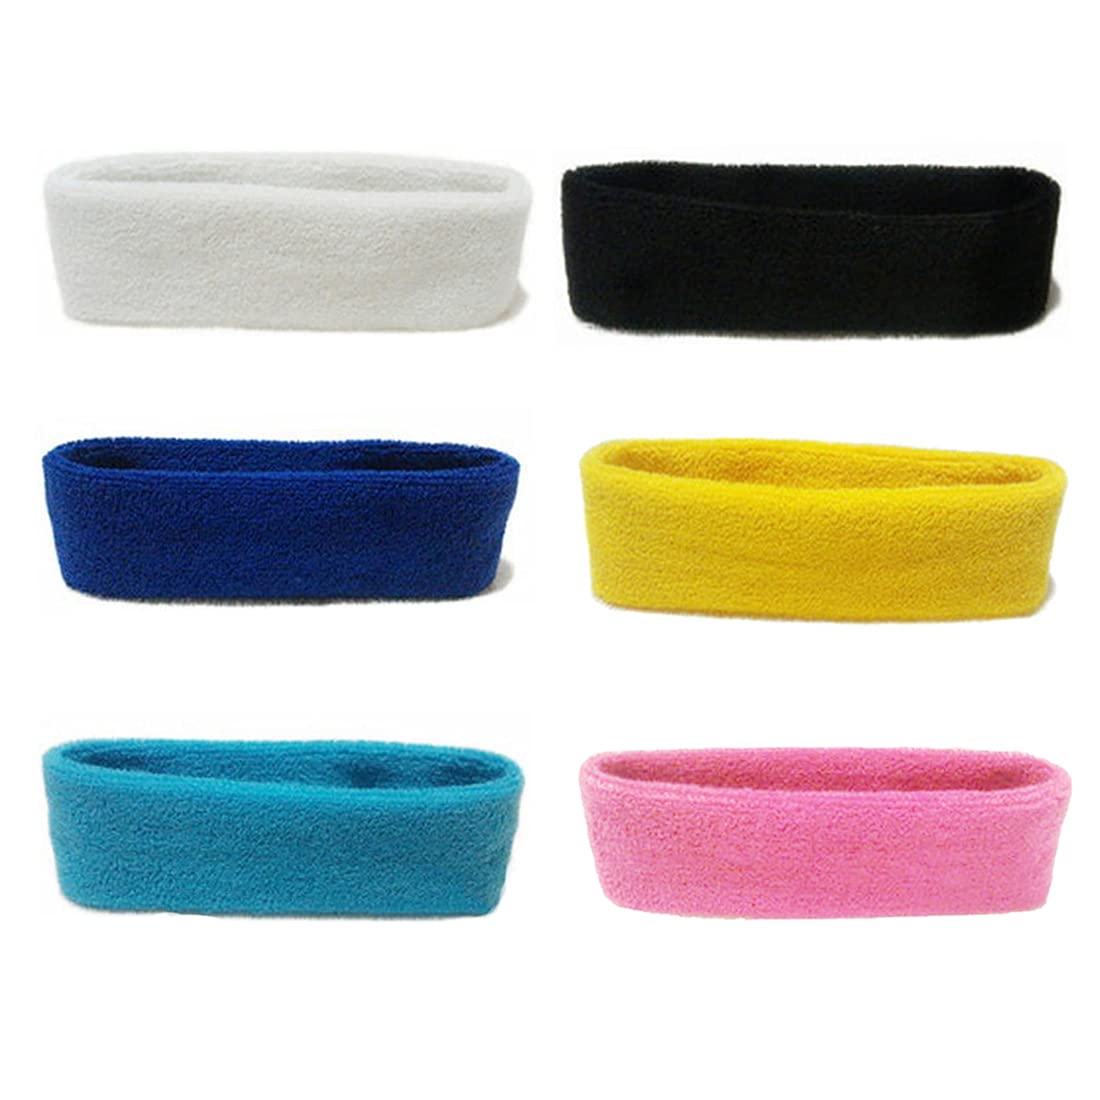 Yellow Chimes Head Band for Women Men Gym Headband for Men Sports Headband for Workout Hairband Elastic Exercise Headband for Women Sweatbands for Running, Gym, Yoga, Cycling, Tennis, Cricket and Other Sports - Unisex Wearability